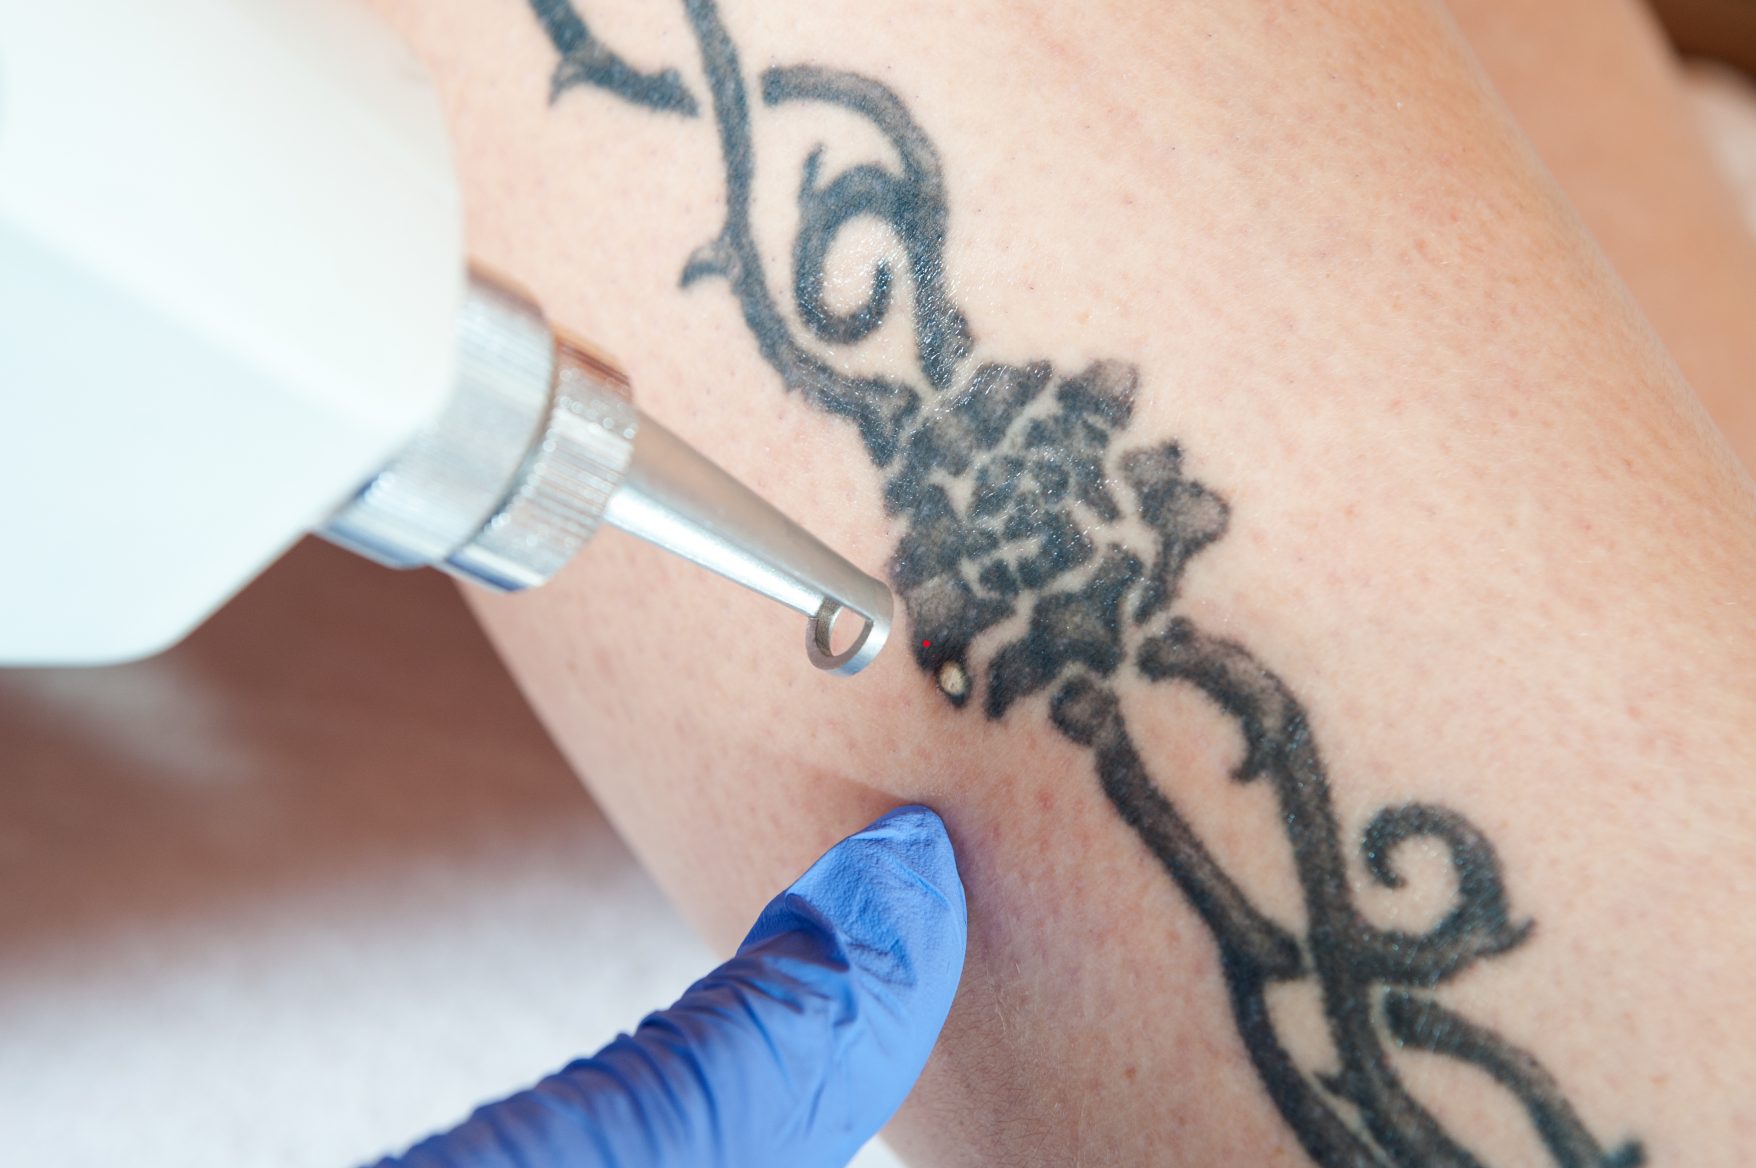 Tattoo removal being performed with a laser